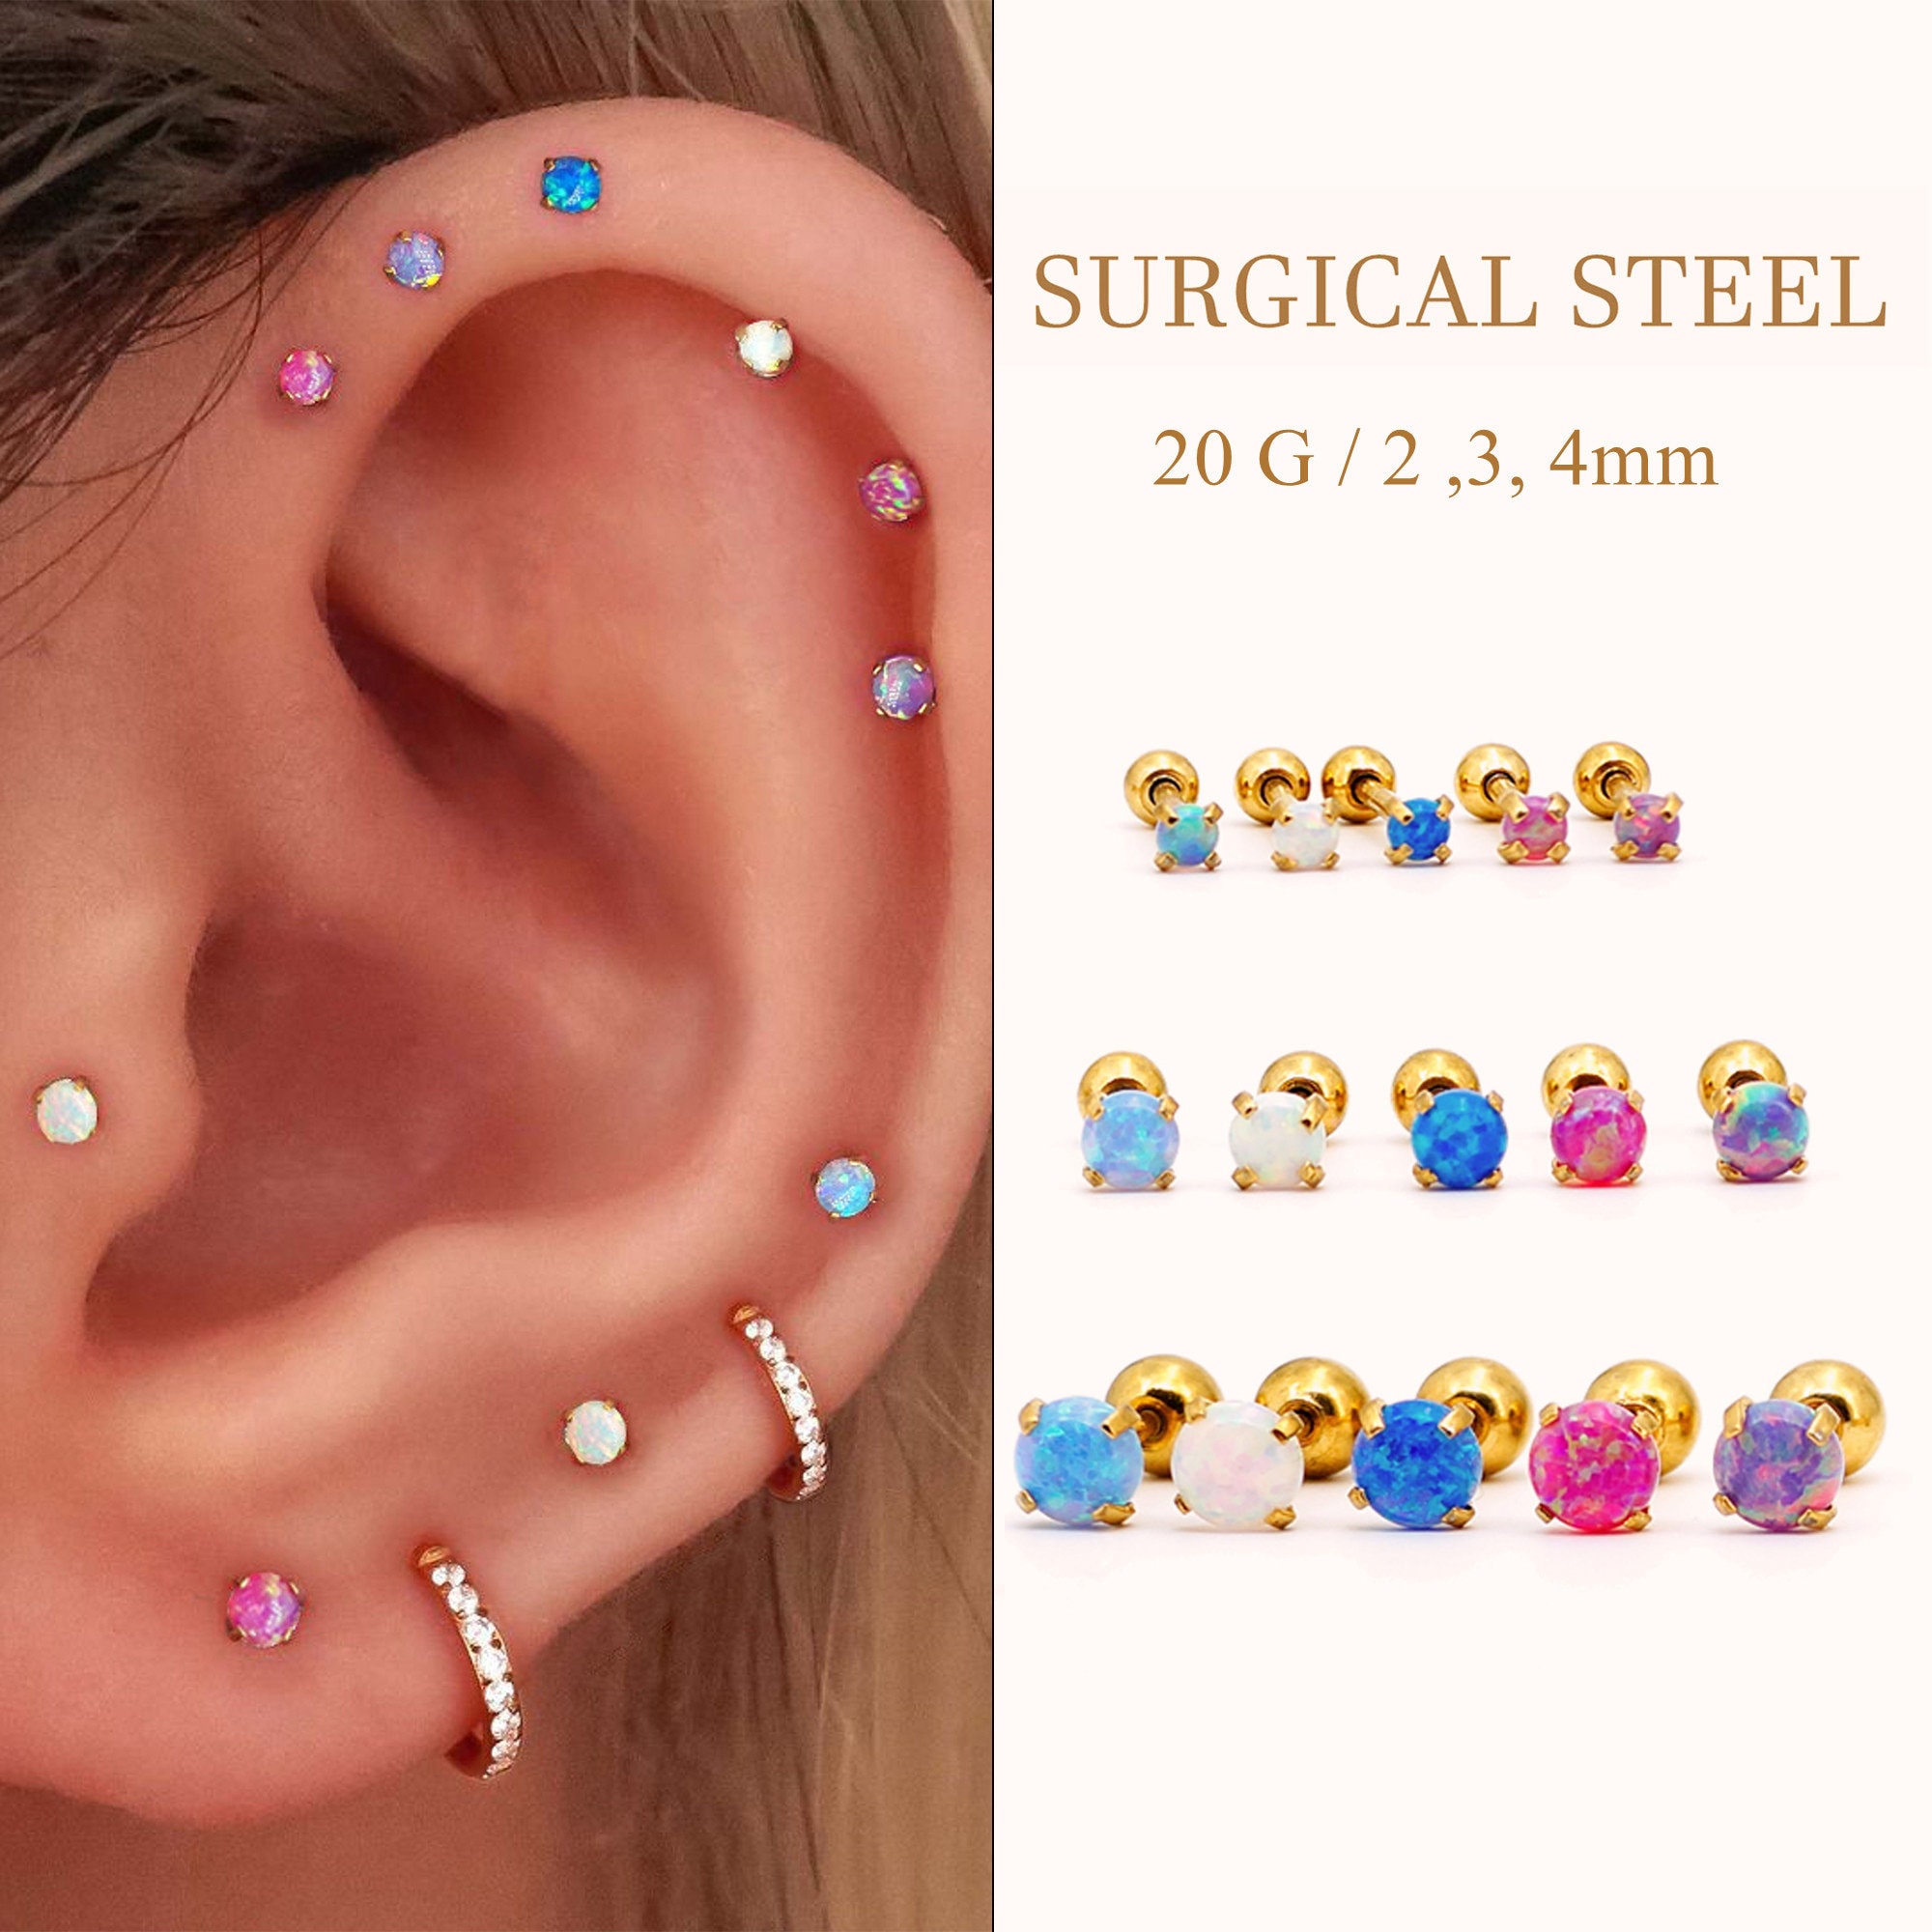 300pcs Ear Backing With Pad, Surgical Steel Earring Backs, Secure Earring  Backs For Heavy Earrings, Hypoallergenic Safety Backing For Ear Studs